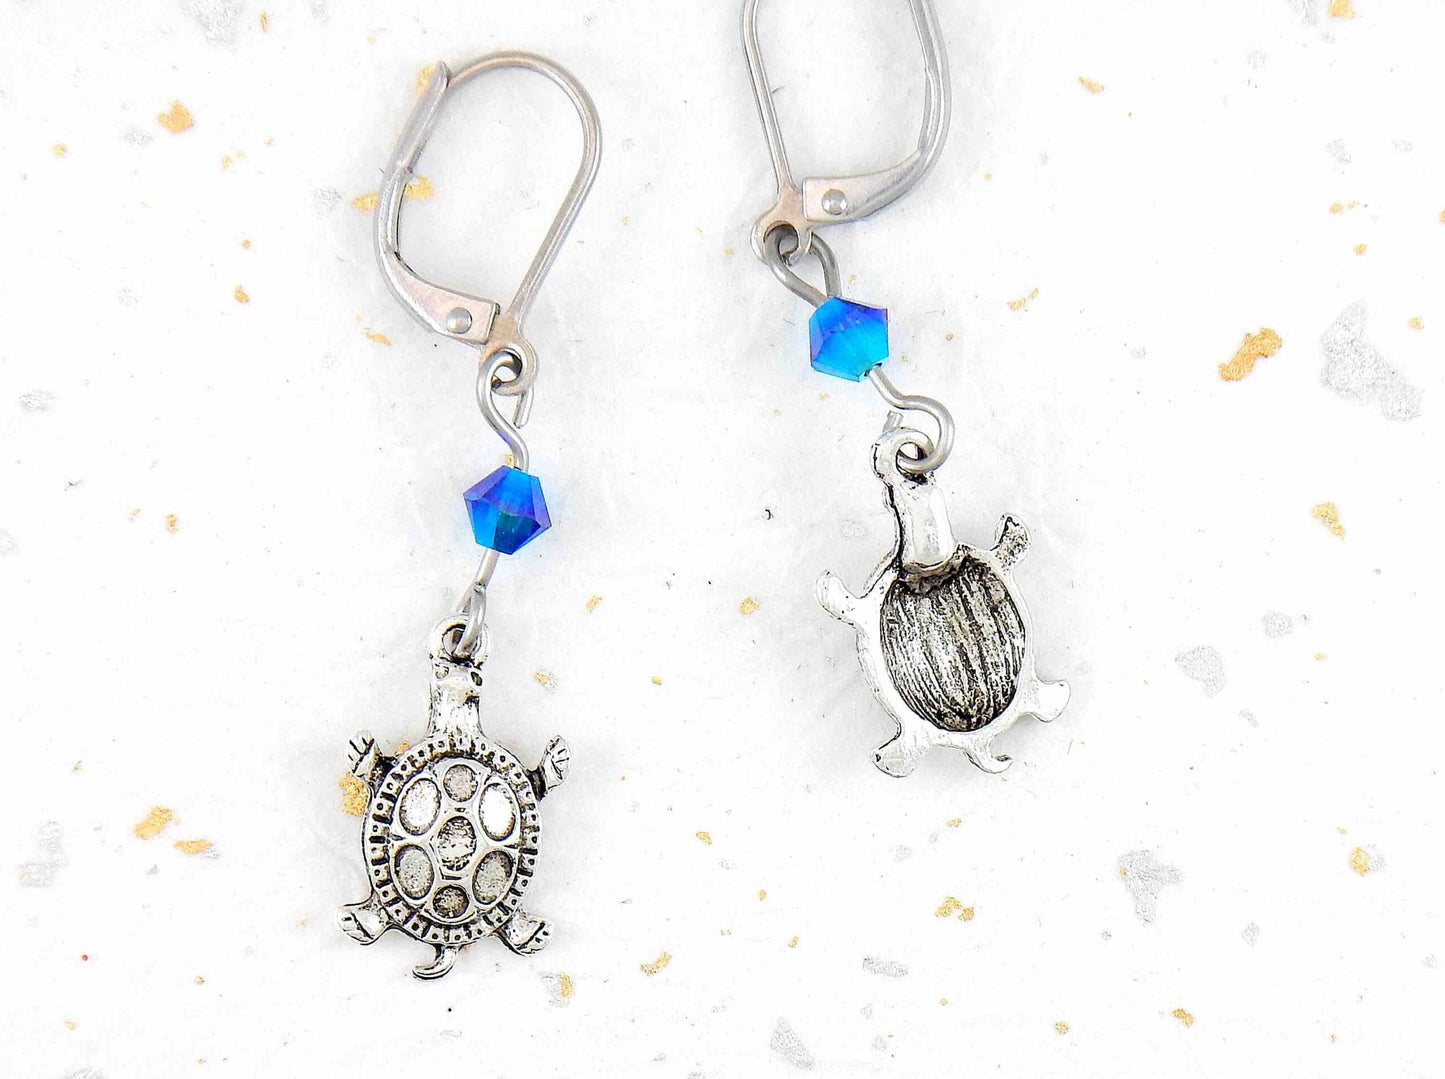 Long earrings with small silver turtles and metallic blue Swarovski crystals, stainless steel lever back hooks